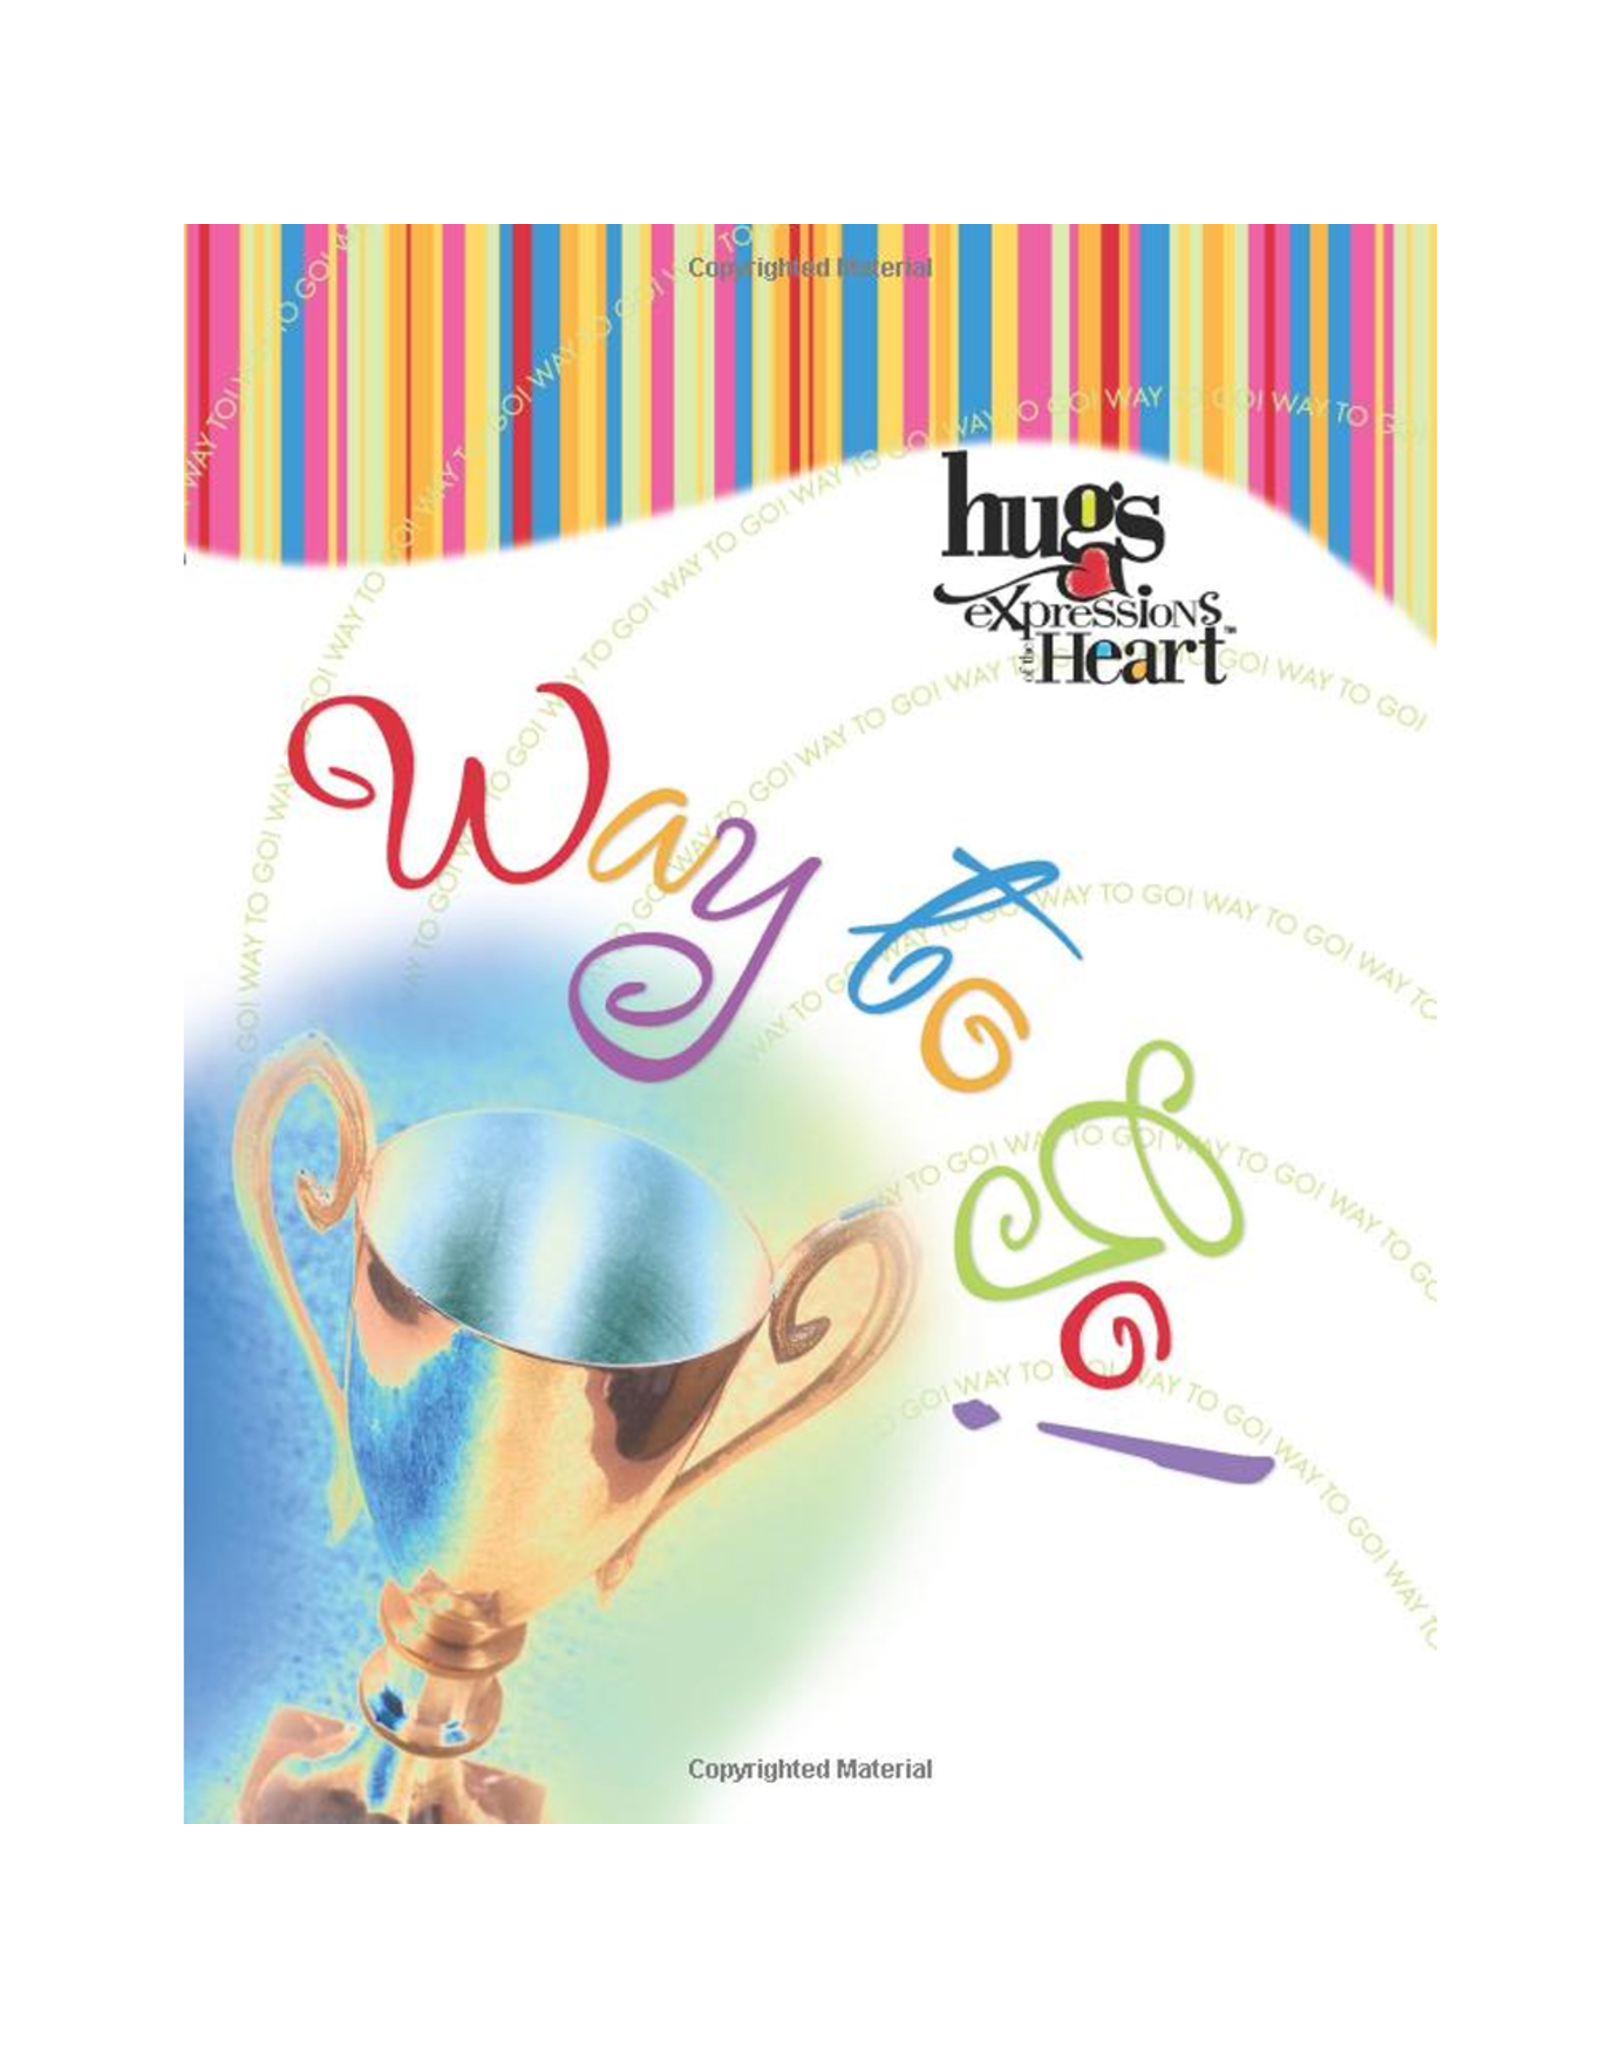 Simon and Schuster Gift Book Way to Go Hug Expression from the Heart